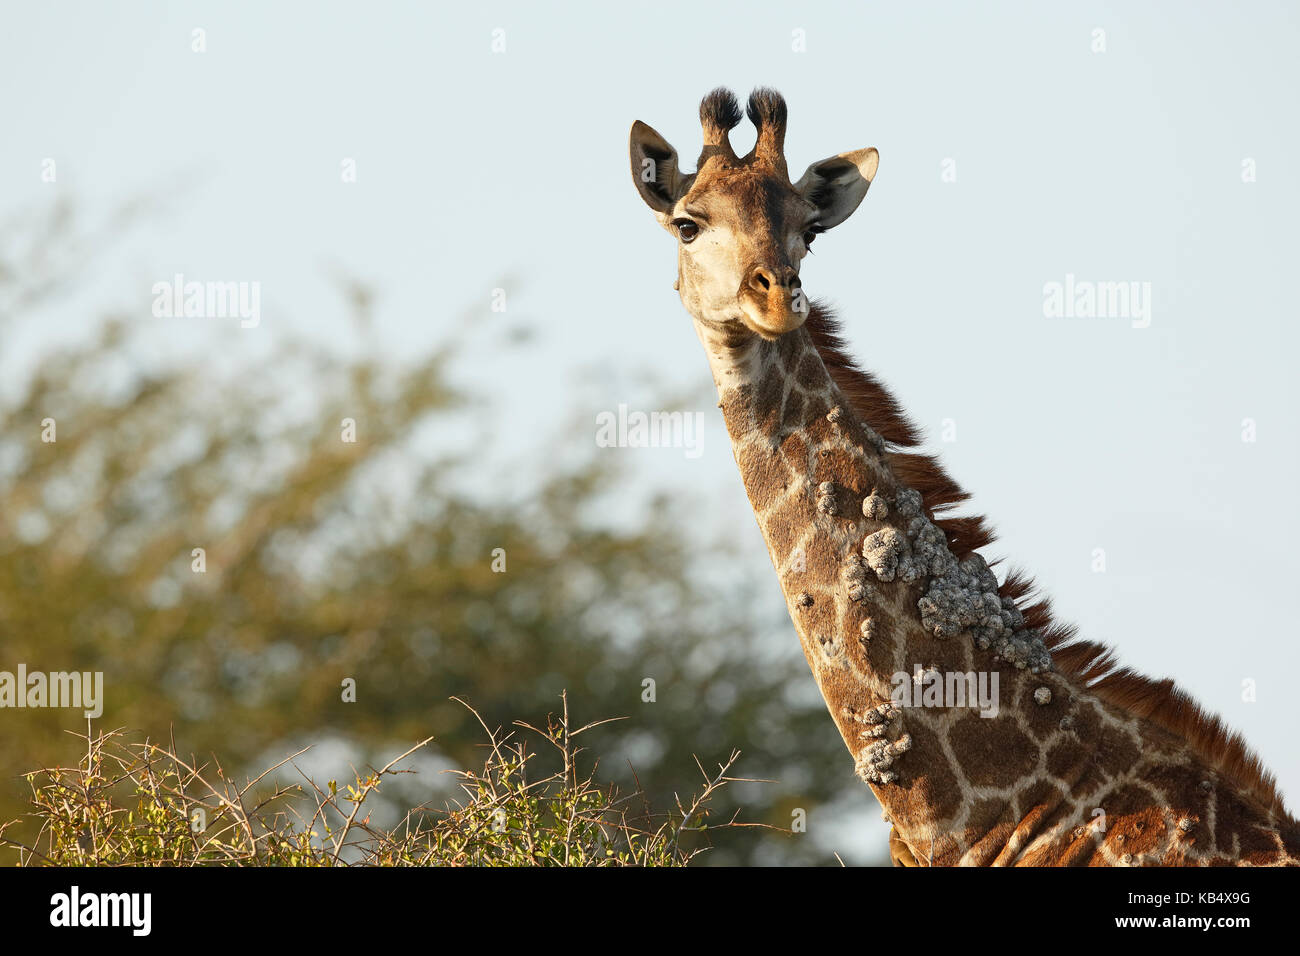 Portrait of a Giraffe (Giraffa camelopardalis) with a skin disease, likely lumpy skin disease, South Africa, Mpumalanga, Kruger National Park Stock Photo